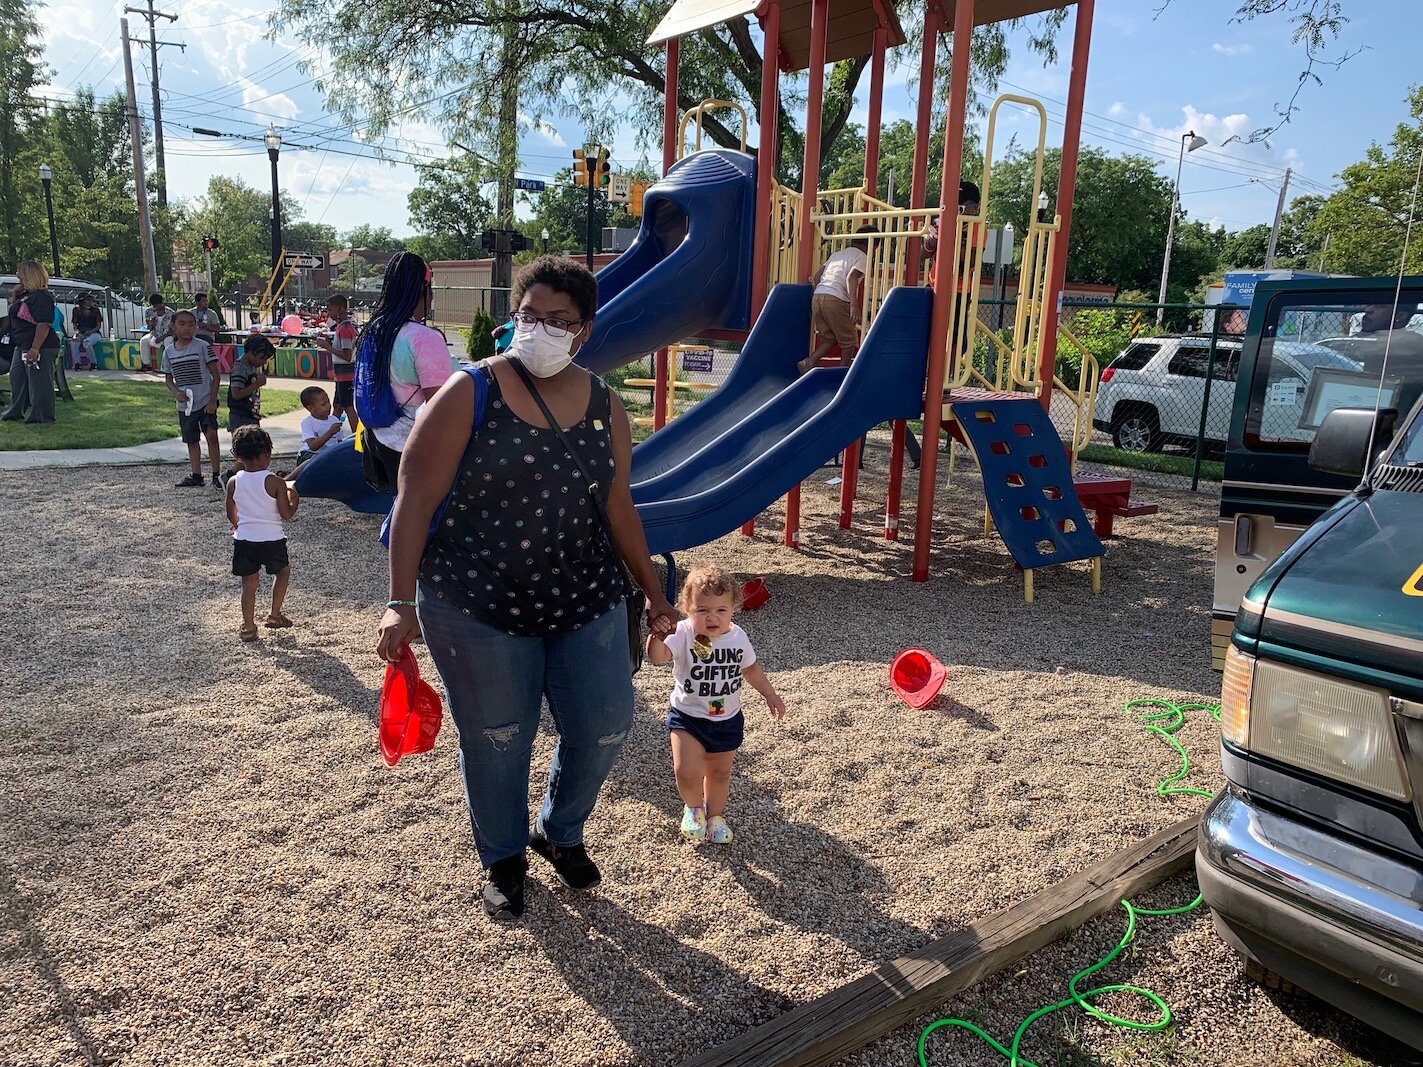 Children were able to use the small playground and get free ice during the National Night Out on Kalamazoo’s North Side Neighborhood.